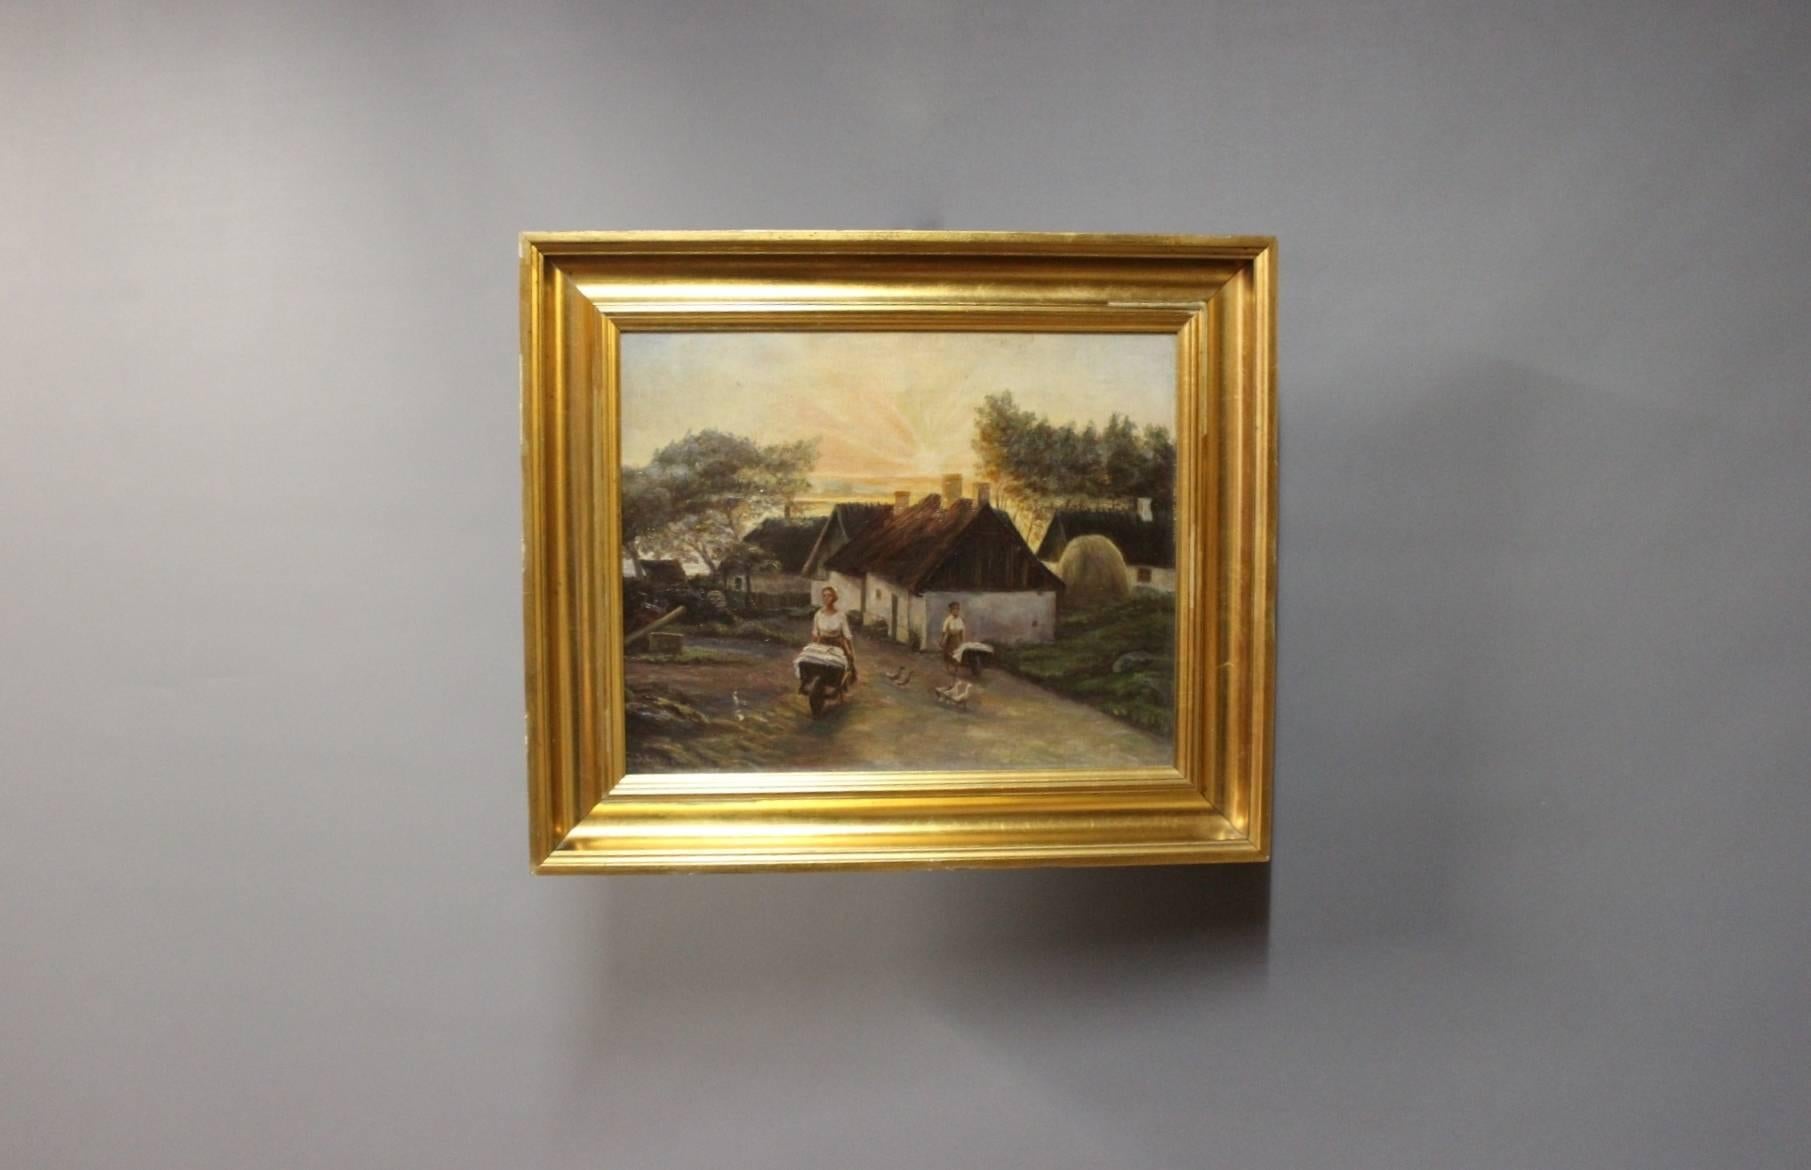 Oil painting on canvas of a sunrise in the country signed by the Danish painter J. Jensen, 1916 with wooden frame decorated with gold-leaf.